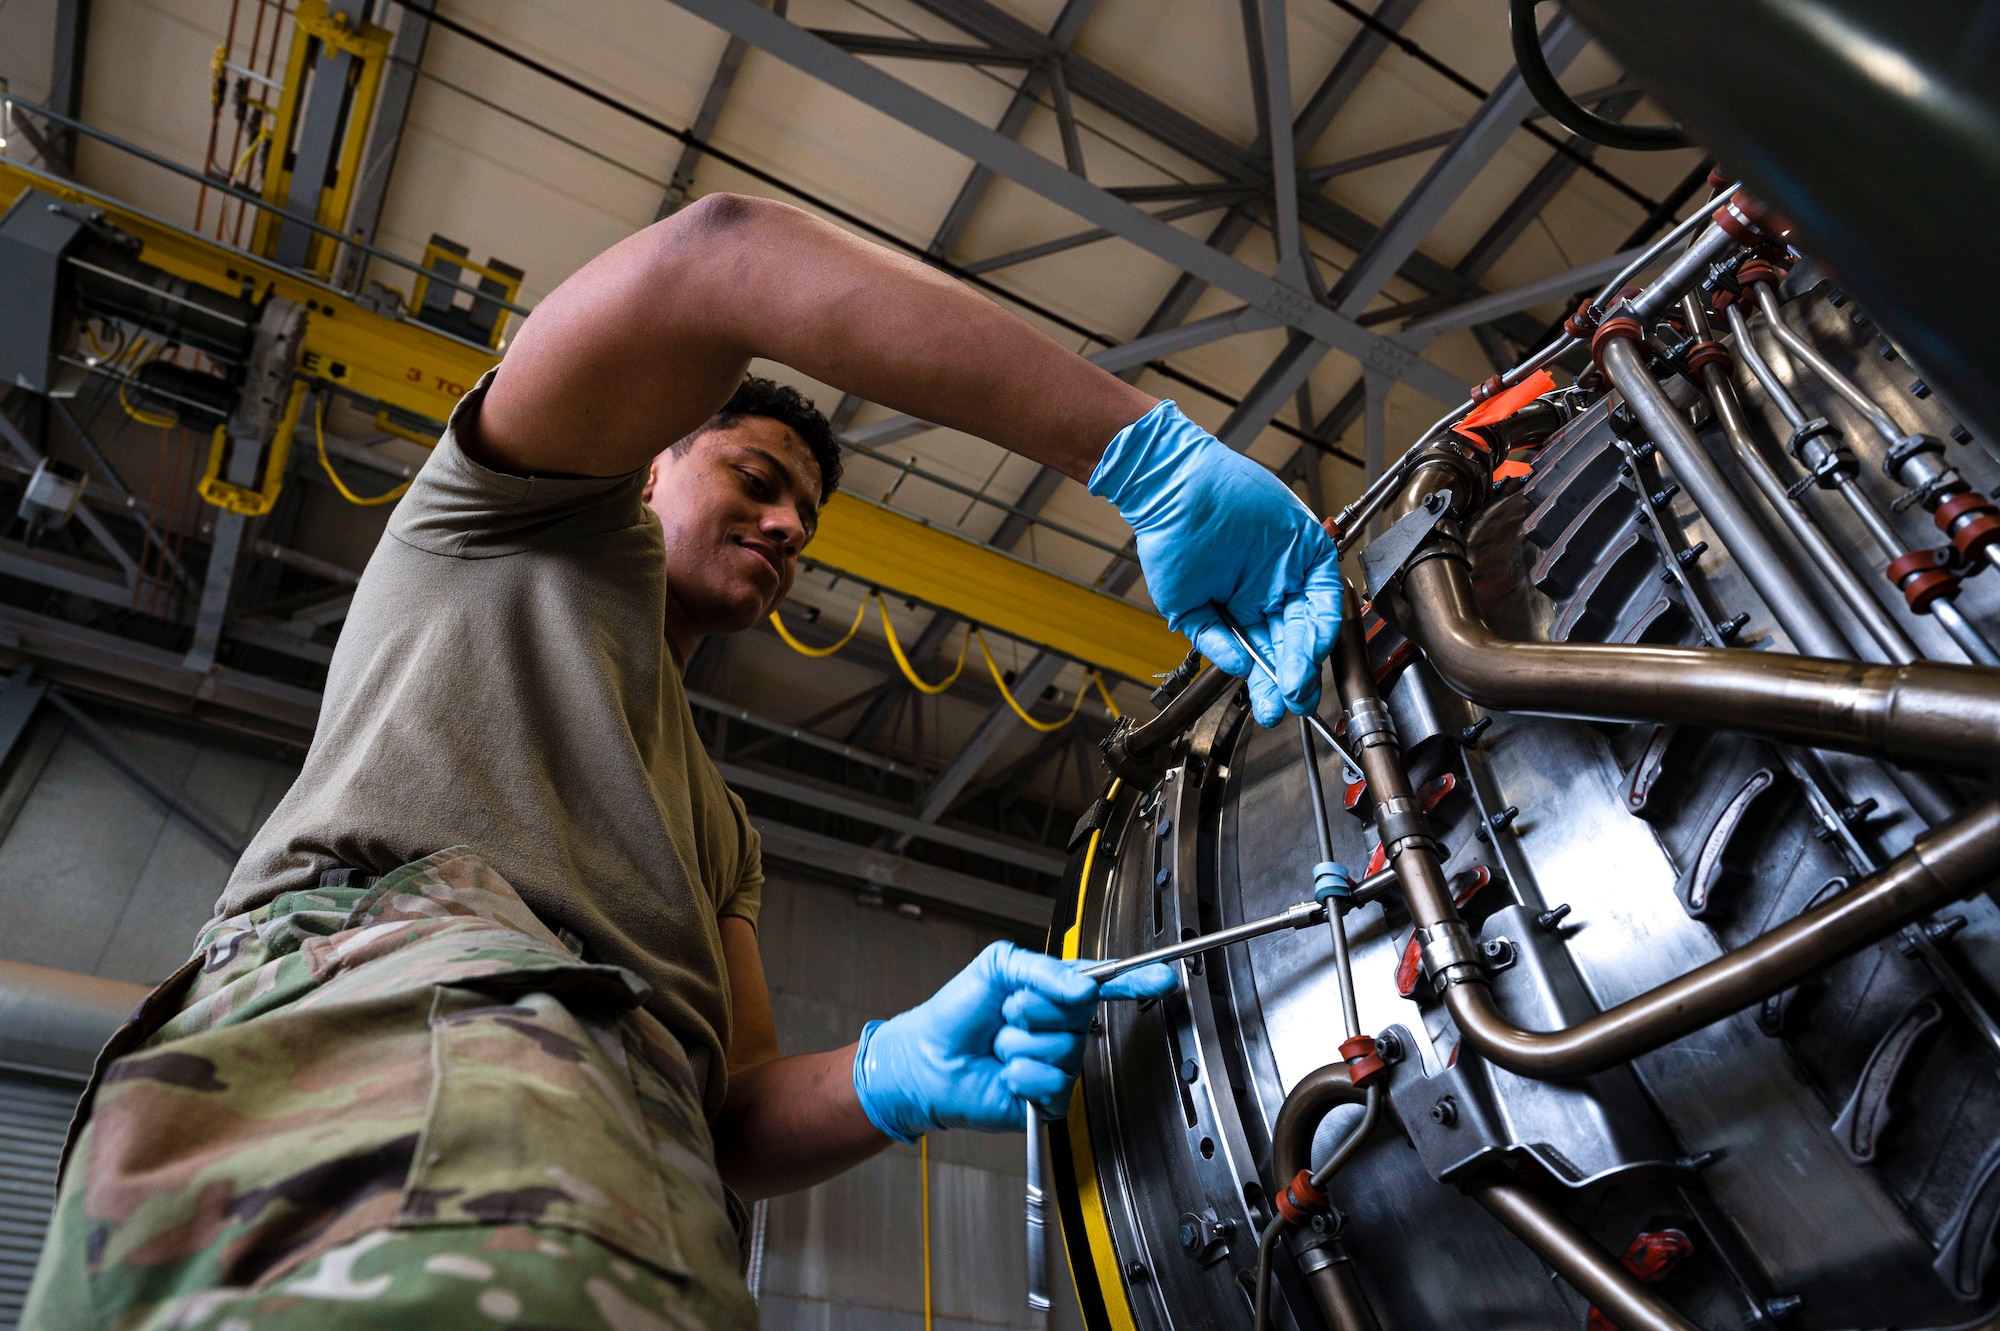 U.S. Air Force Airman 1st Class David Ulerio, 49th Component Maintenance Squadron aerospace propulsion journeyman, conducts routine maintenance on a Pratt and Whitney F100 engine at Holloman Air Force Base, New Mexico, May 3, 2023. The 49th CMS provides maintenance to all F-16 Vipers on base and ensures that each aircraft is operational for combat effectiveness. (U.S. Air Force photo by Airman 1st Class Isaiah Pedrazzini)